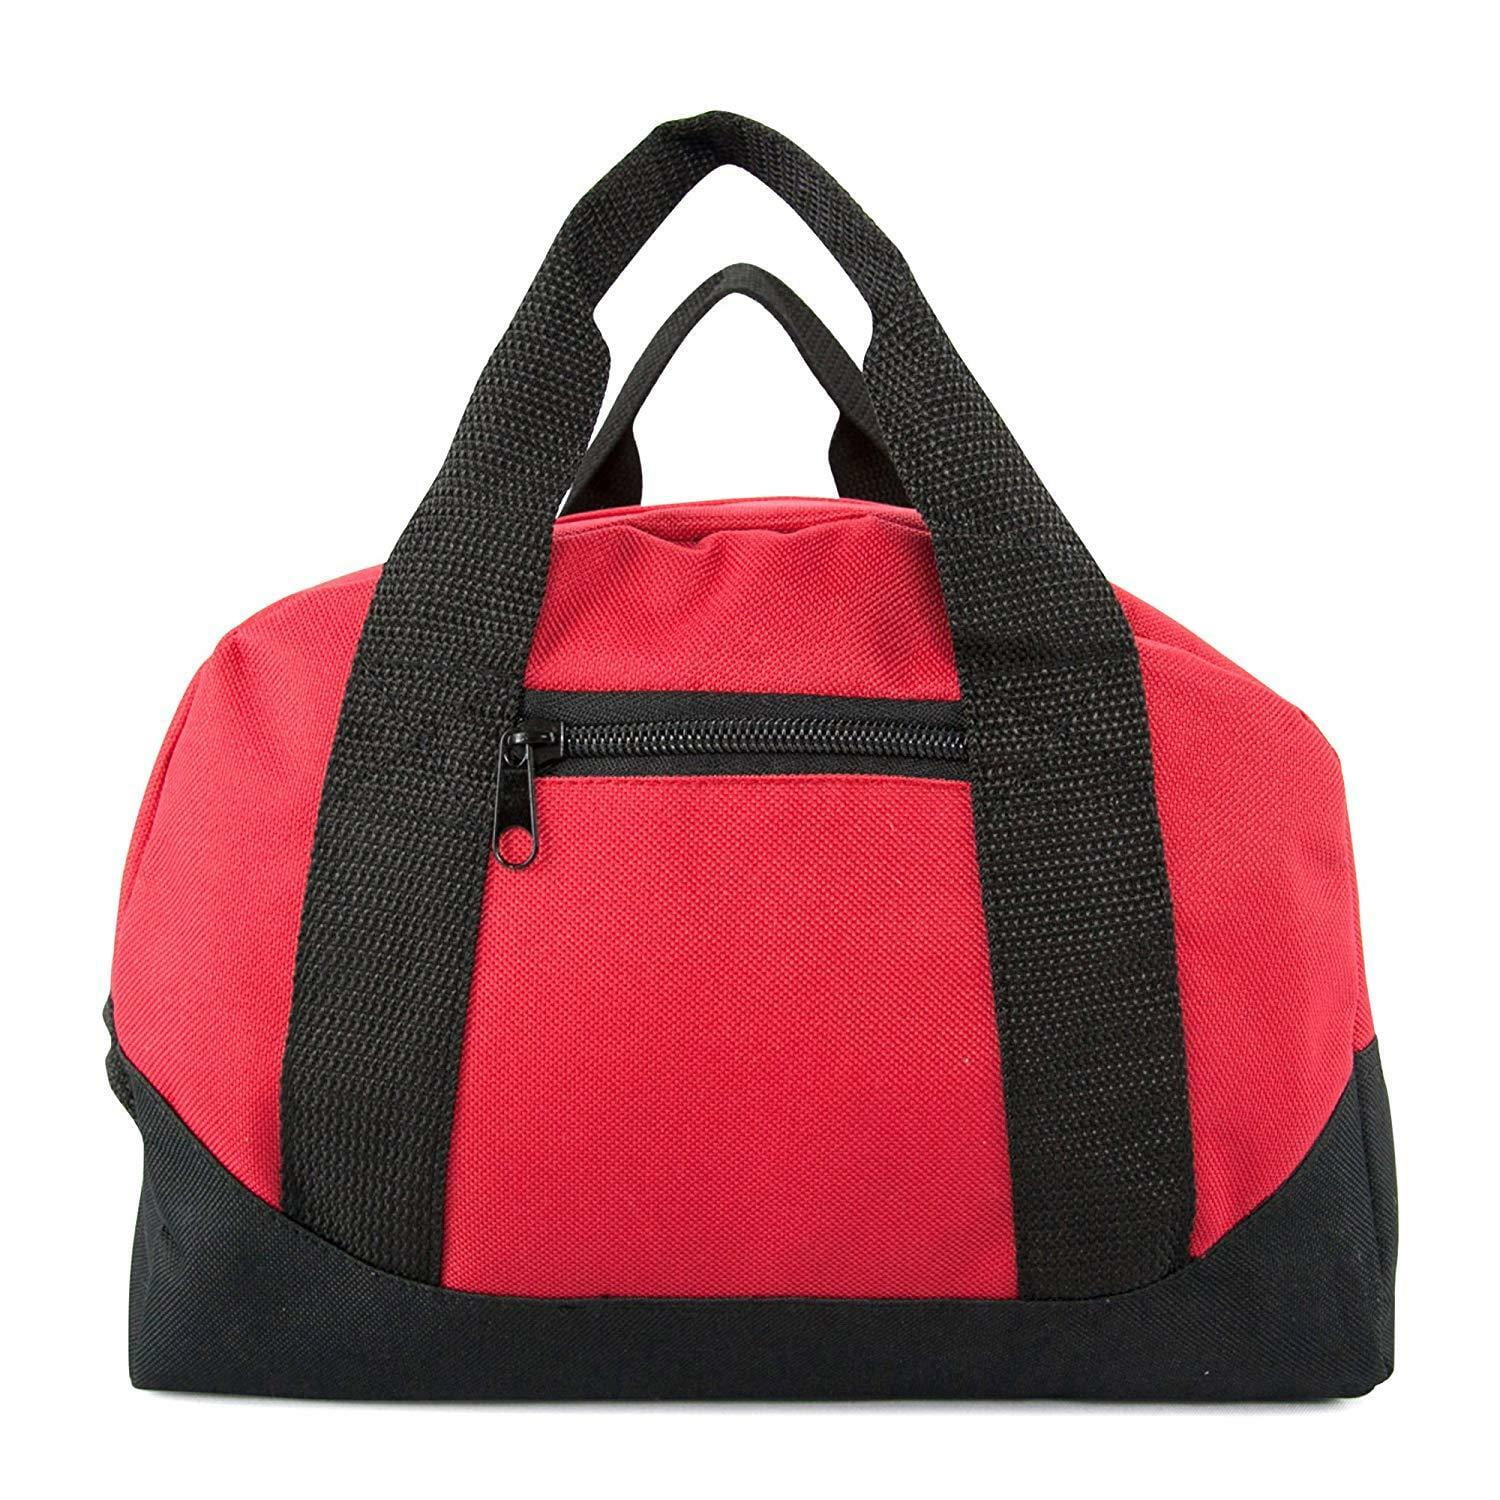 12" Duffel Duffle Travel Sports Gym Bags Mini Carry-on Luggage Small Two Tone 